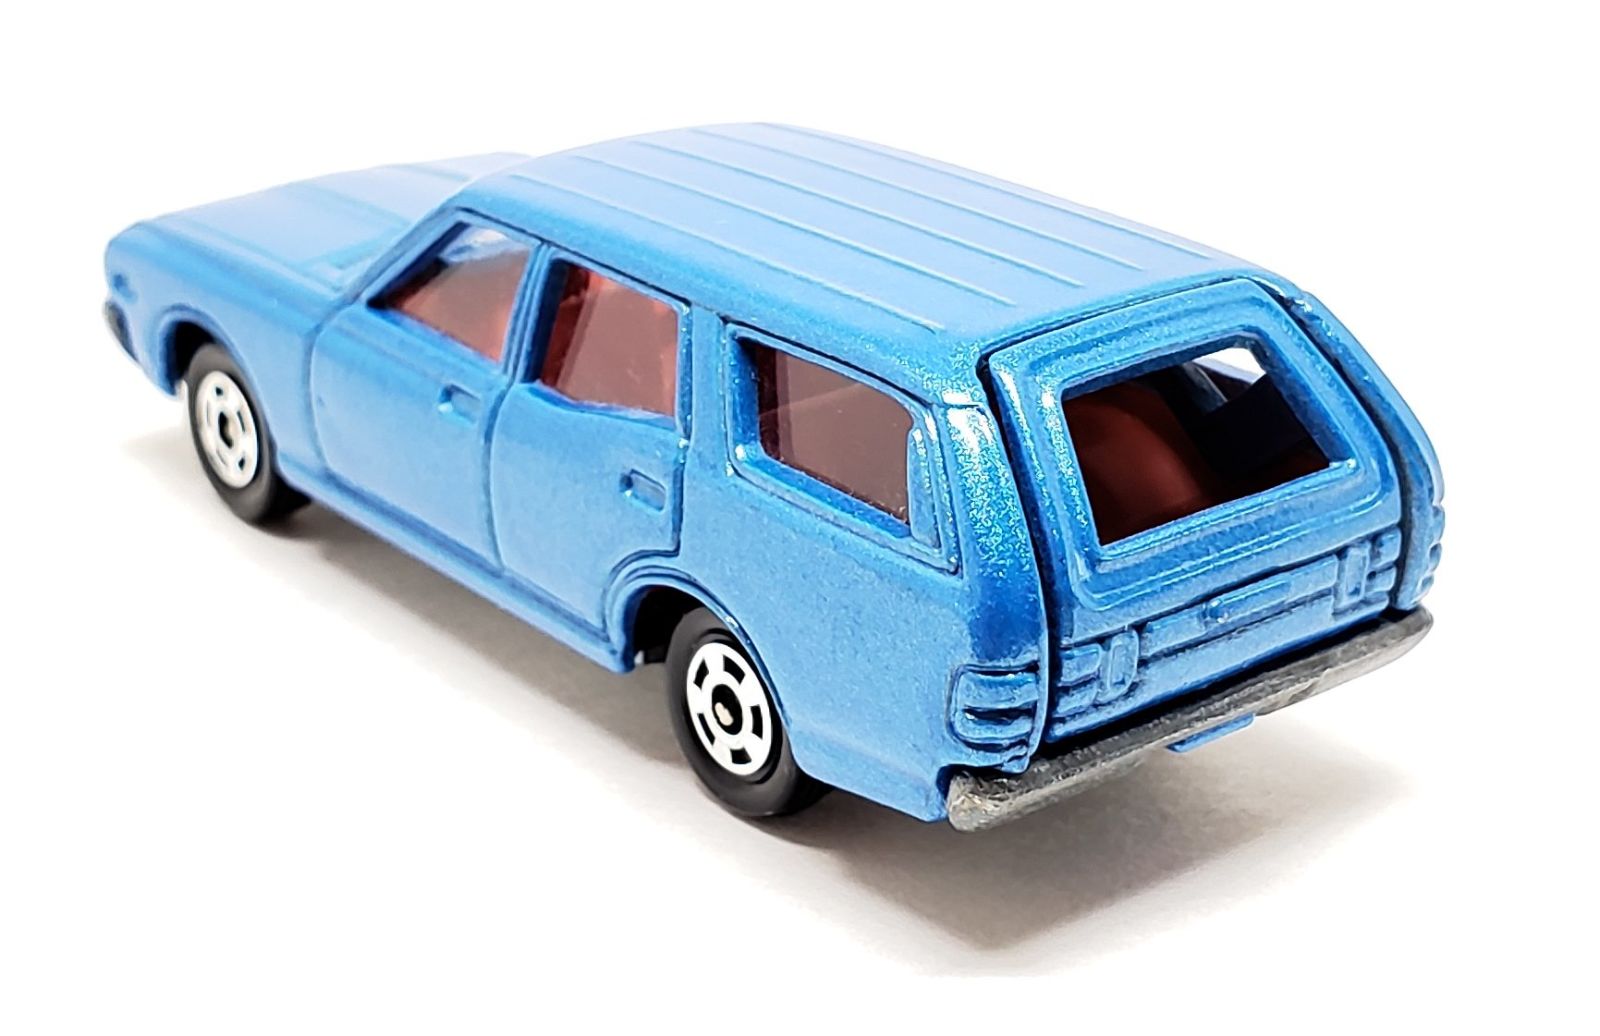 Illustration for article titled [REVIEW] Tomica Nissan Gloria Van